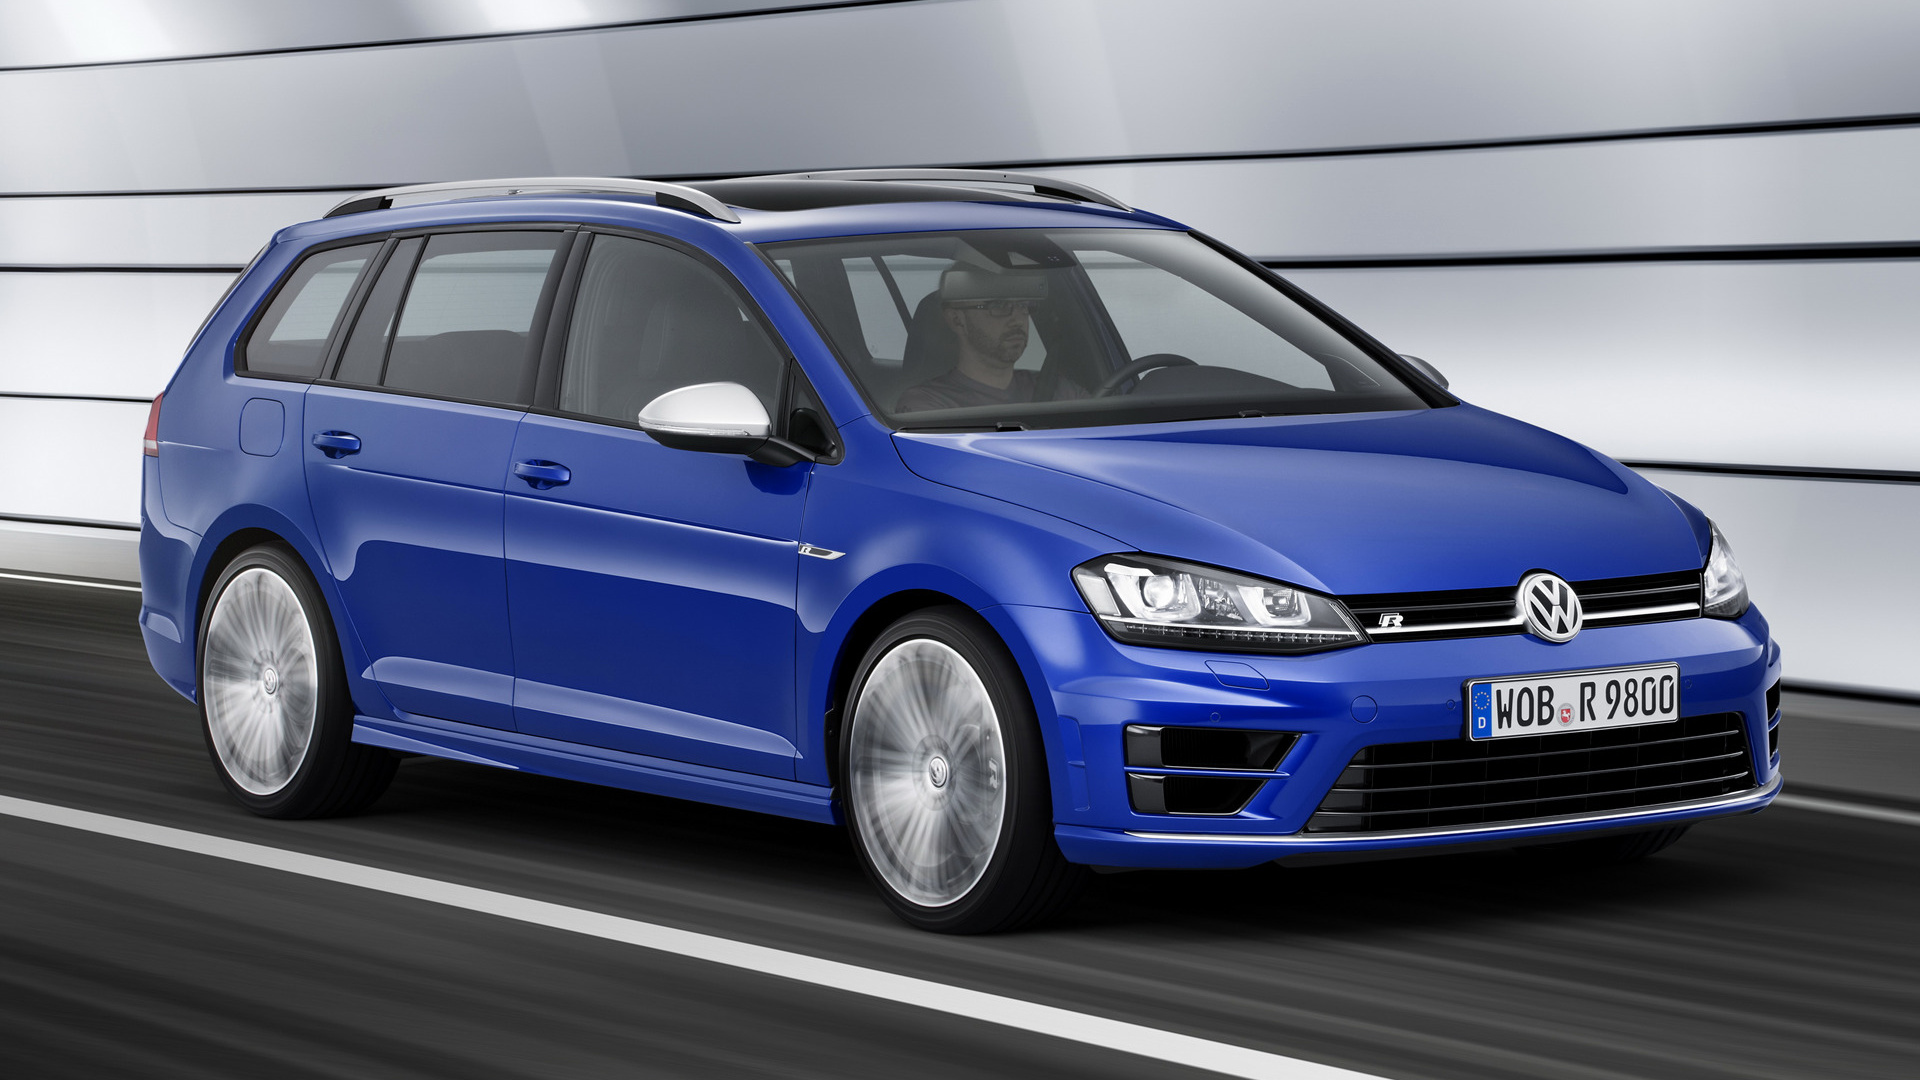 Volkswagen Golf R Variant 2015 Wallpapers and HD Images 1920x1080